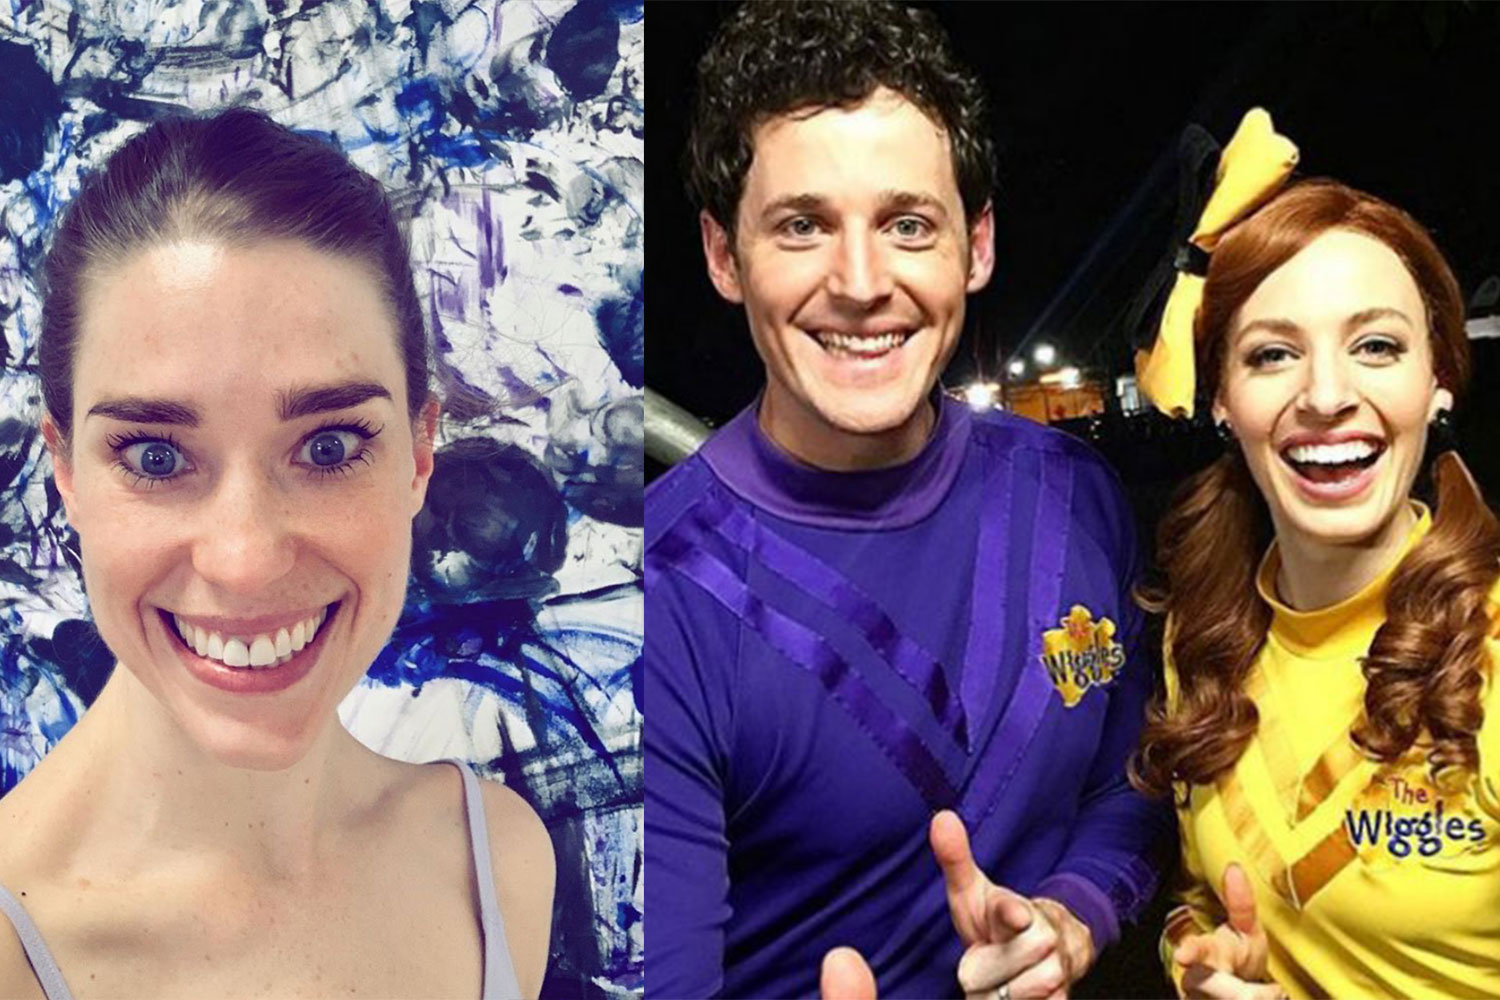 Emma cast the wiggles The Wiggles: